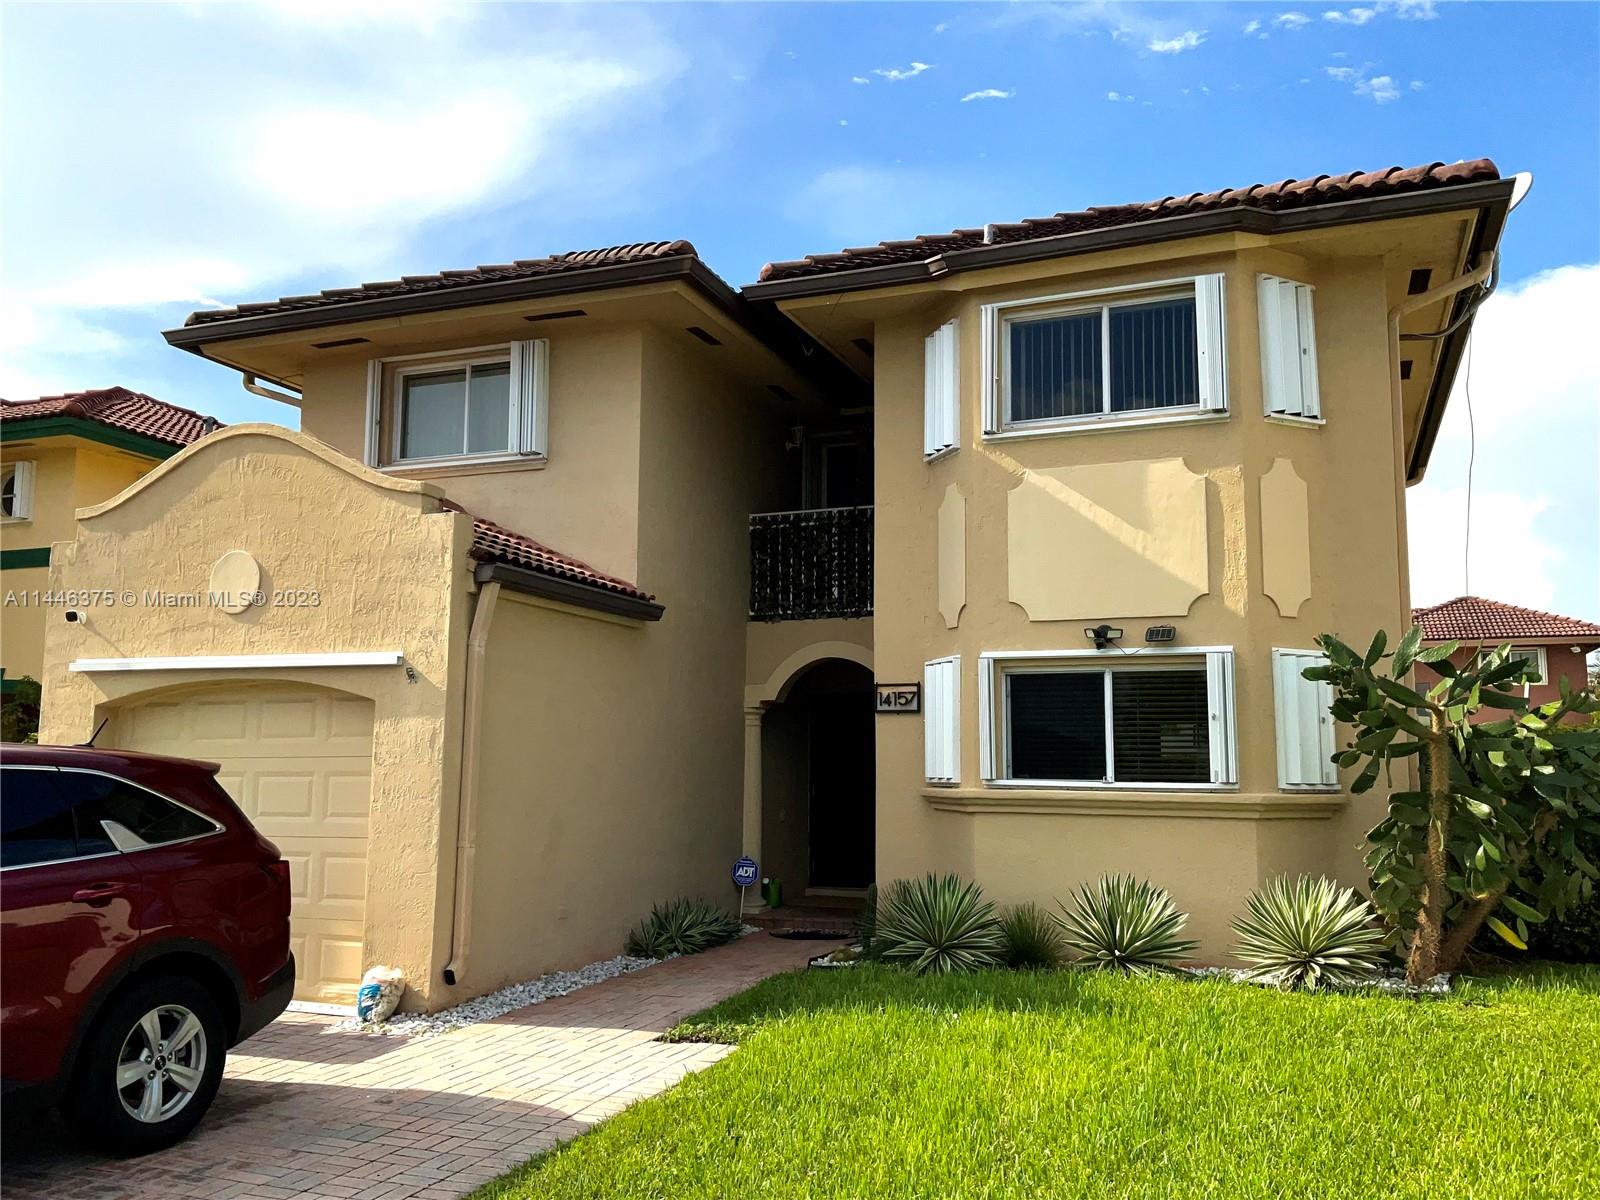 Photo 1 of 14157 SW 164th Ter in Miami - MLS A11446375